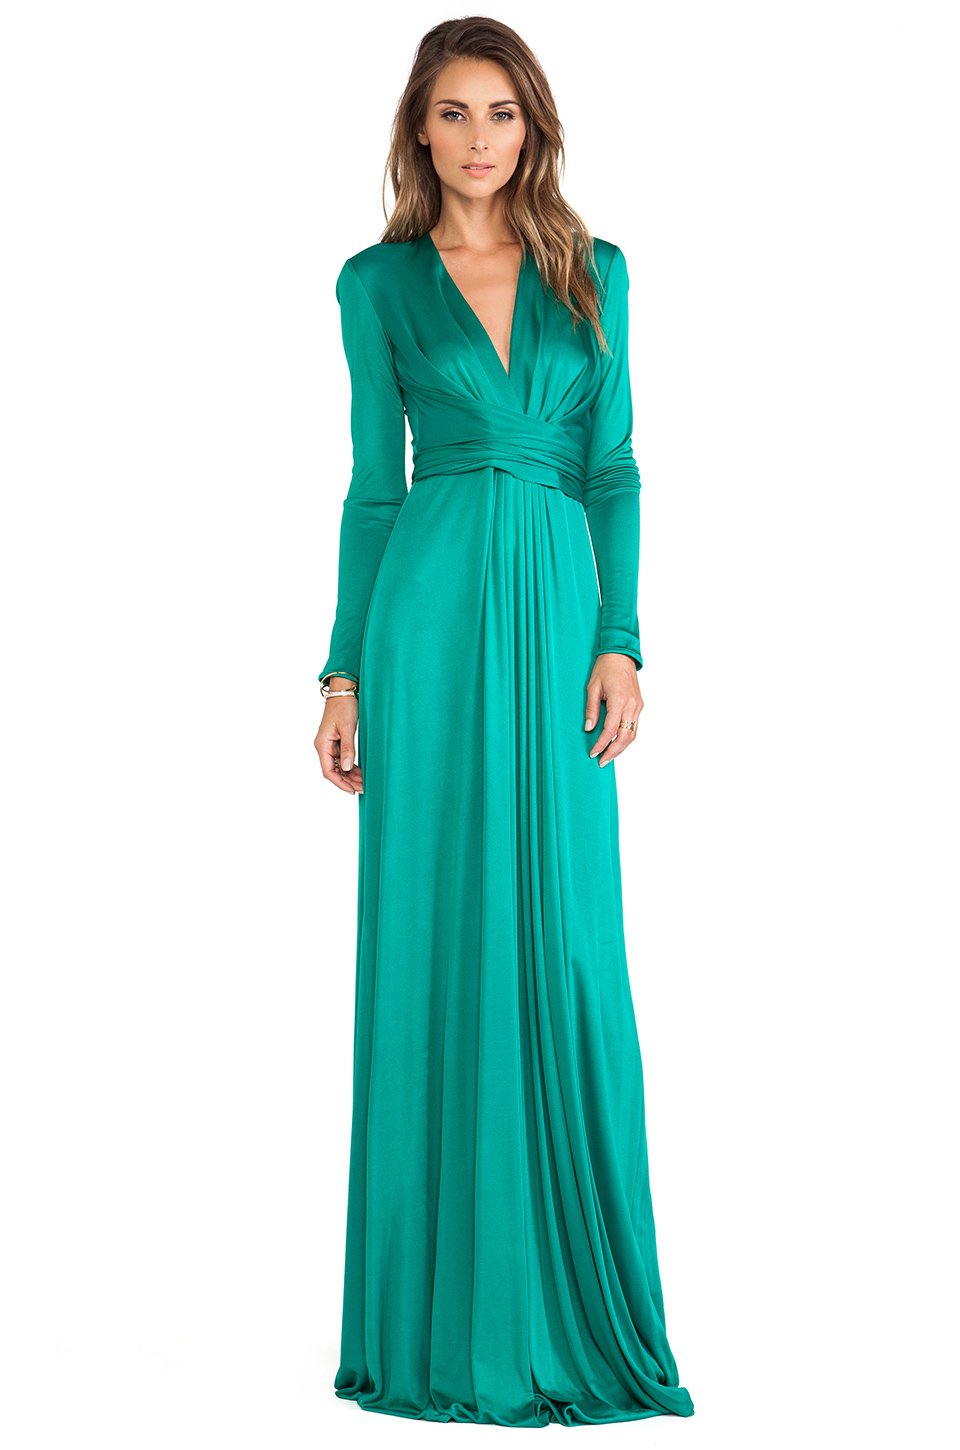 Issa Florence Long Sleeve Maxi Dress in Green (Jade) | Lyst